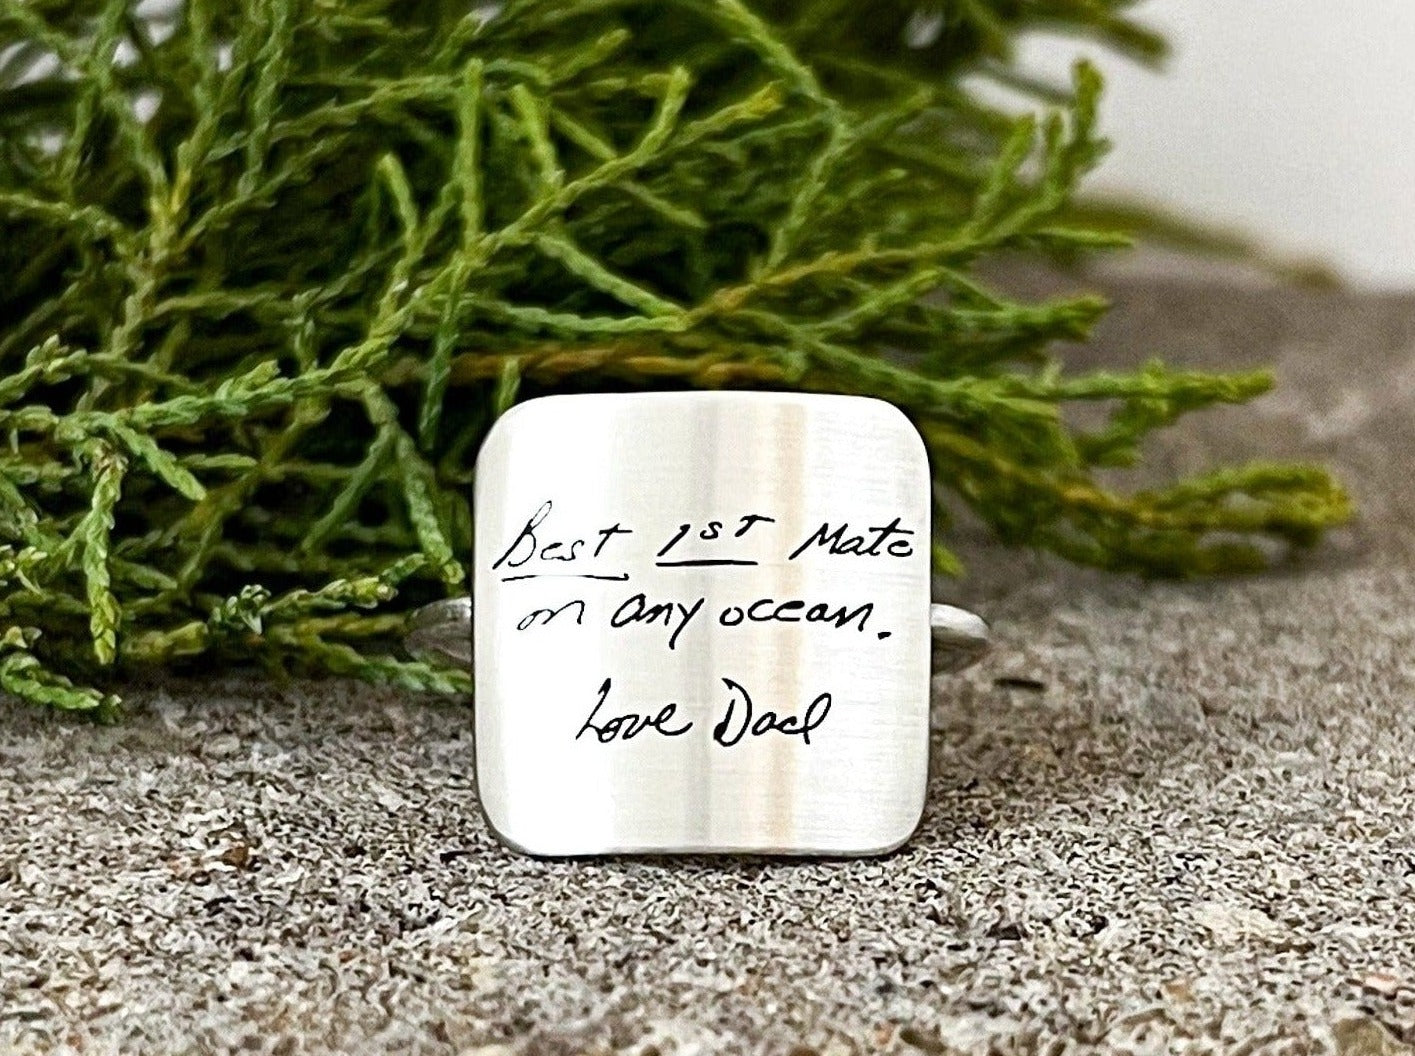 Harper Ring | Silver Square Plate Memorial Ring | Personalized With Your Own Handwriting, Signatures and Fingerprints | Unisex | House of Jaco